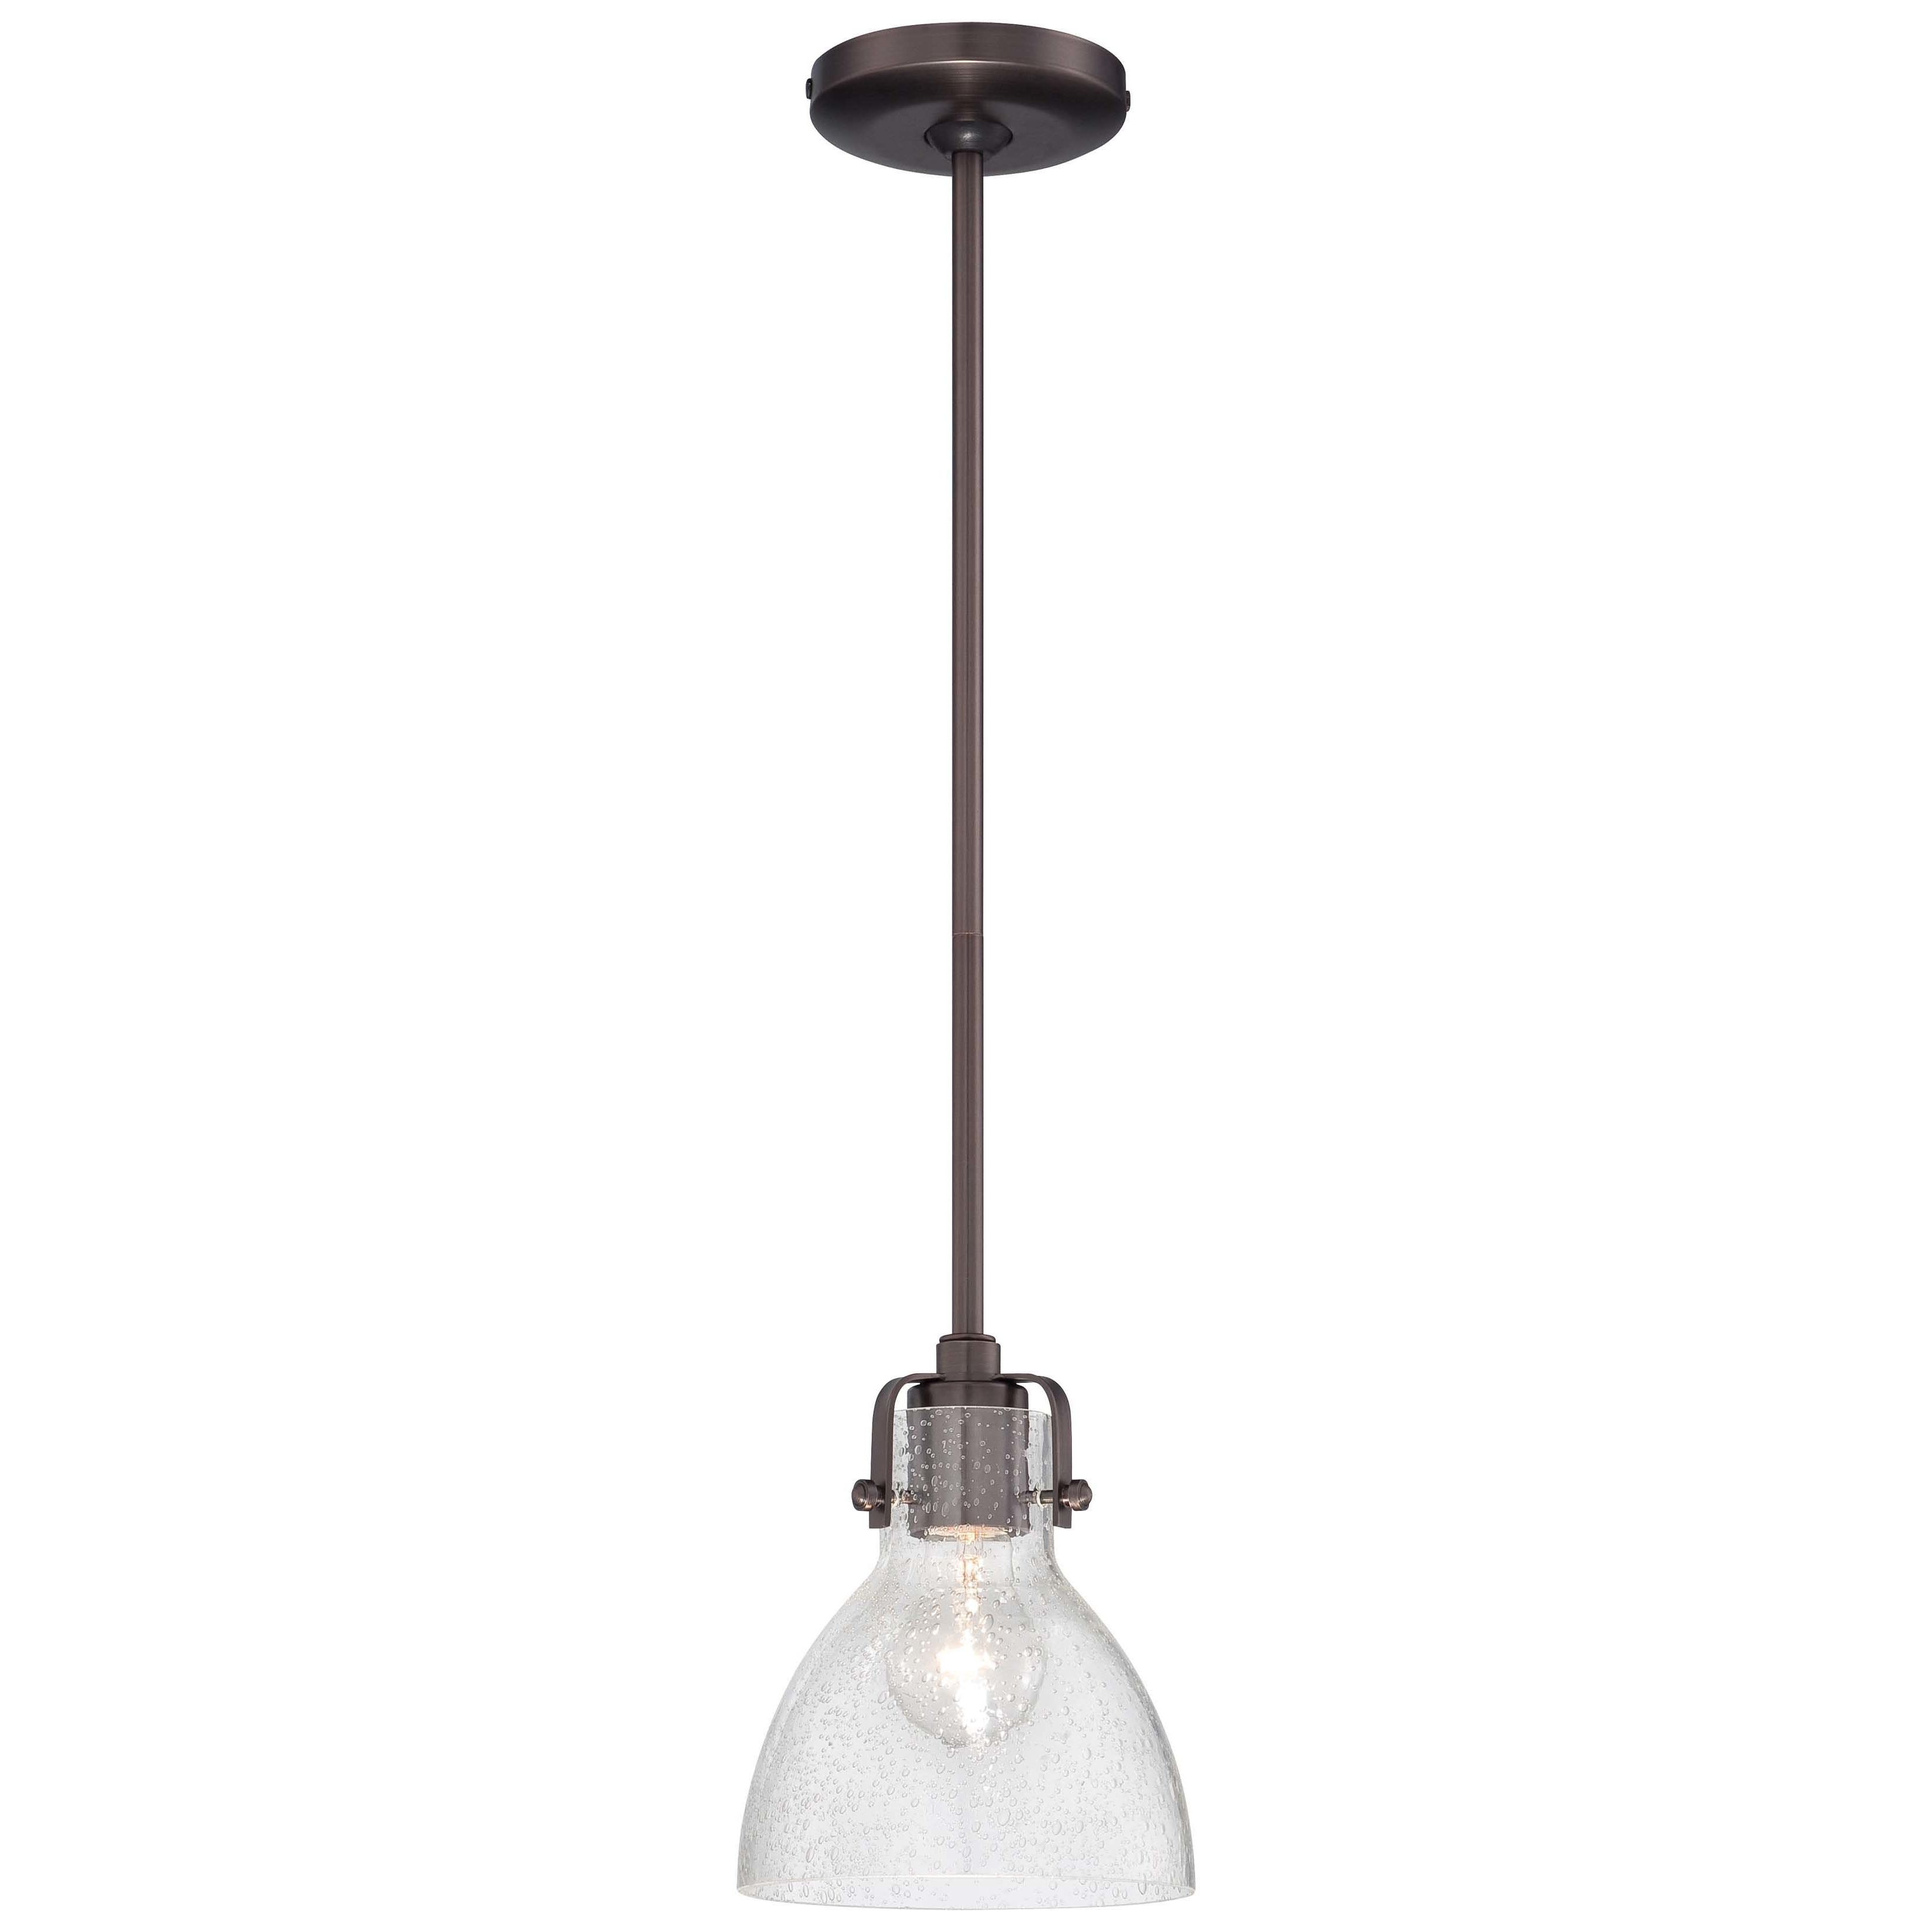 Yarger 1 Light Single Bell Pendants For Well Liked Seeded Mini Pendants You'll Love In  (View 9 of 25)